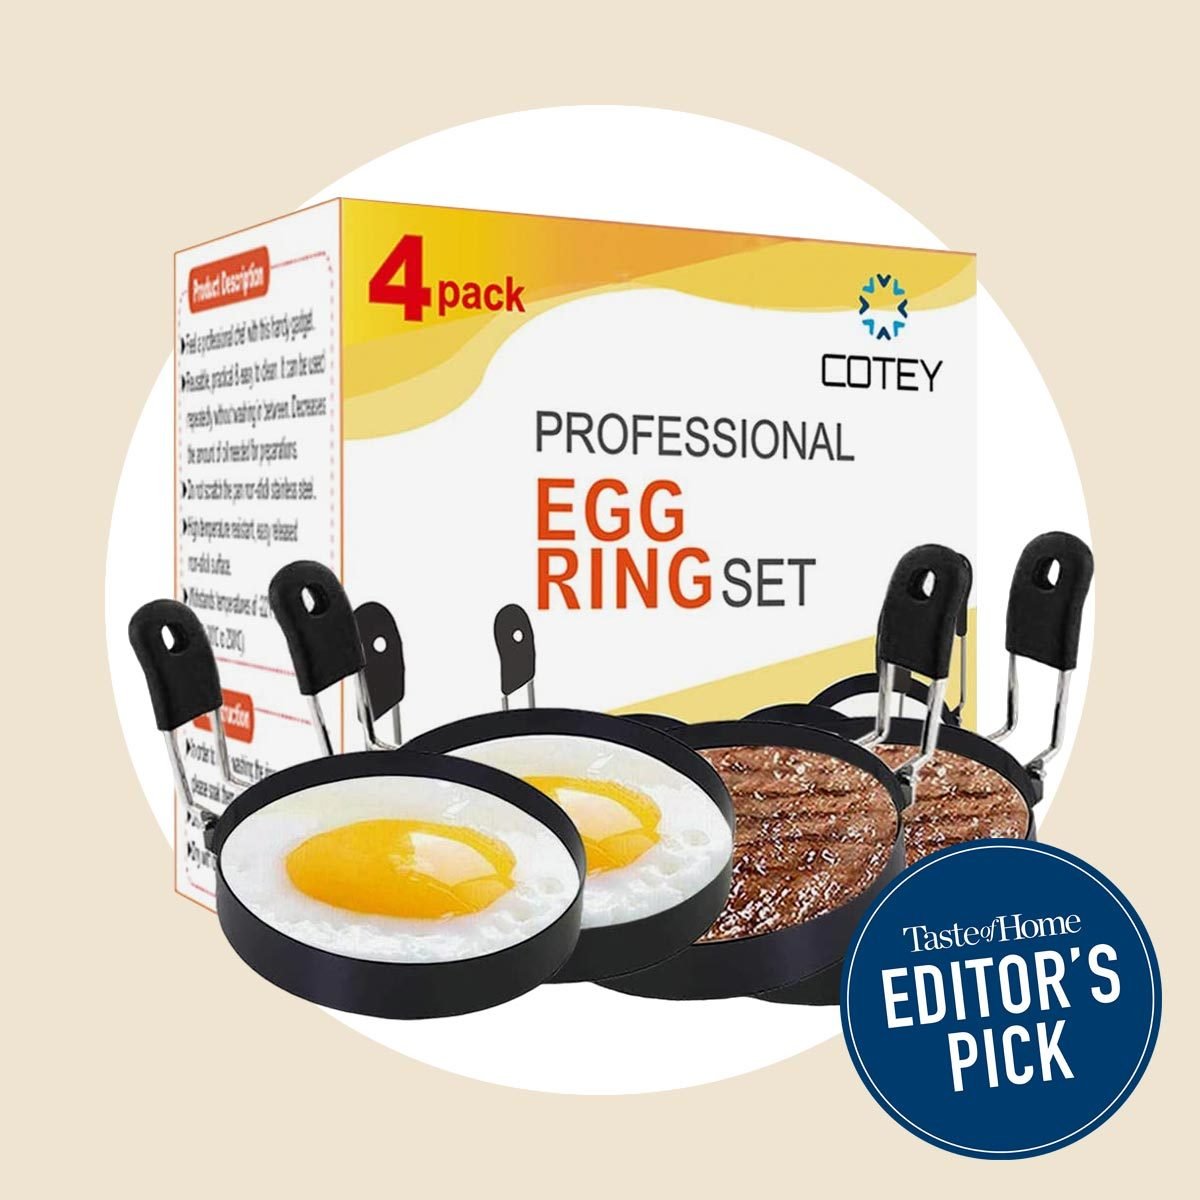 What is an Egg Ring?